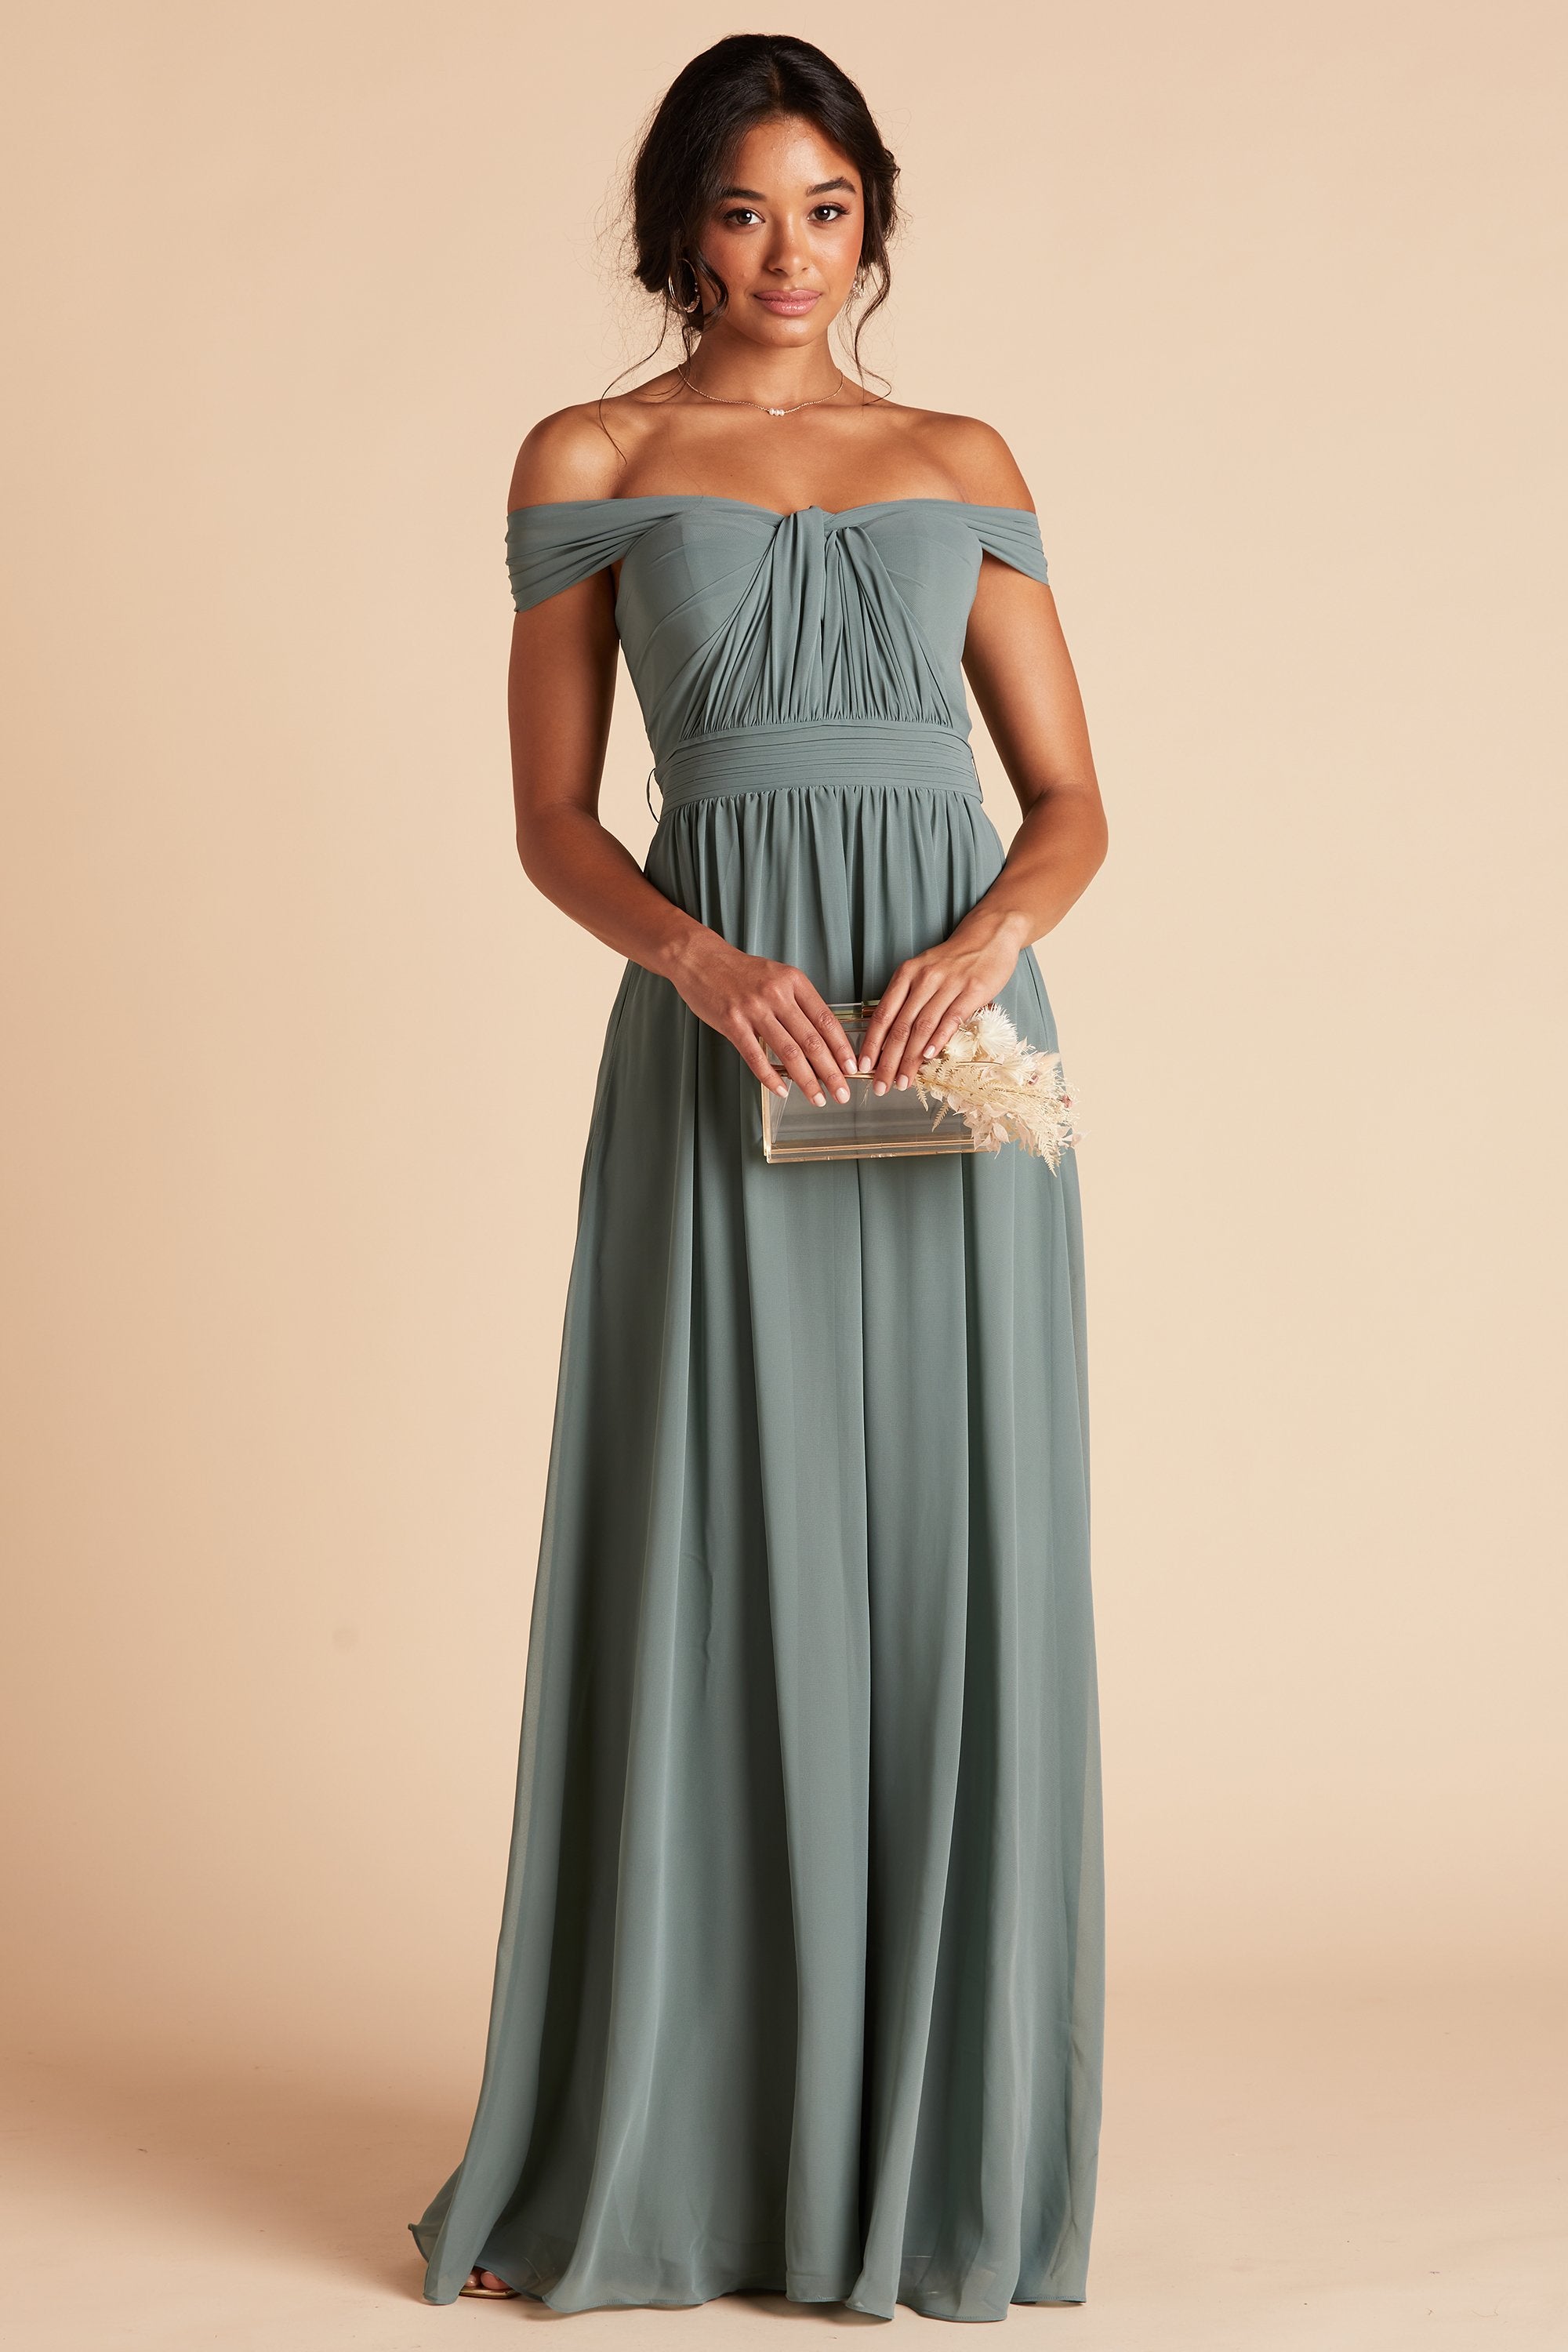 Convertible Turquoise Bridesmaid Dresses Infinity Dresses Multiway Dre –  MyChicDress